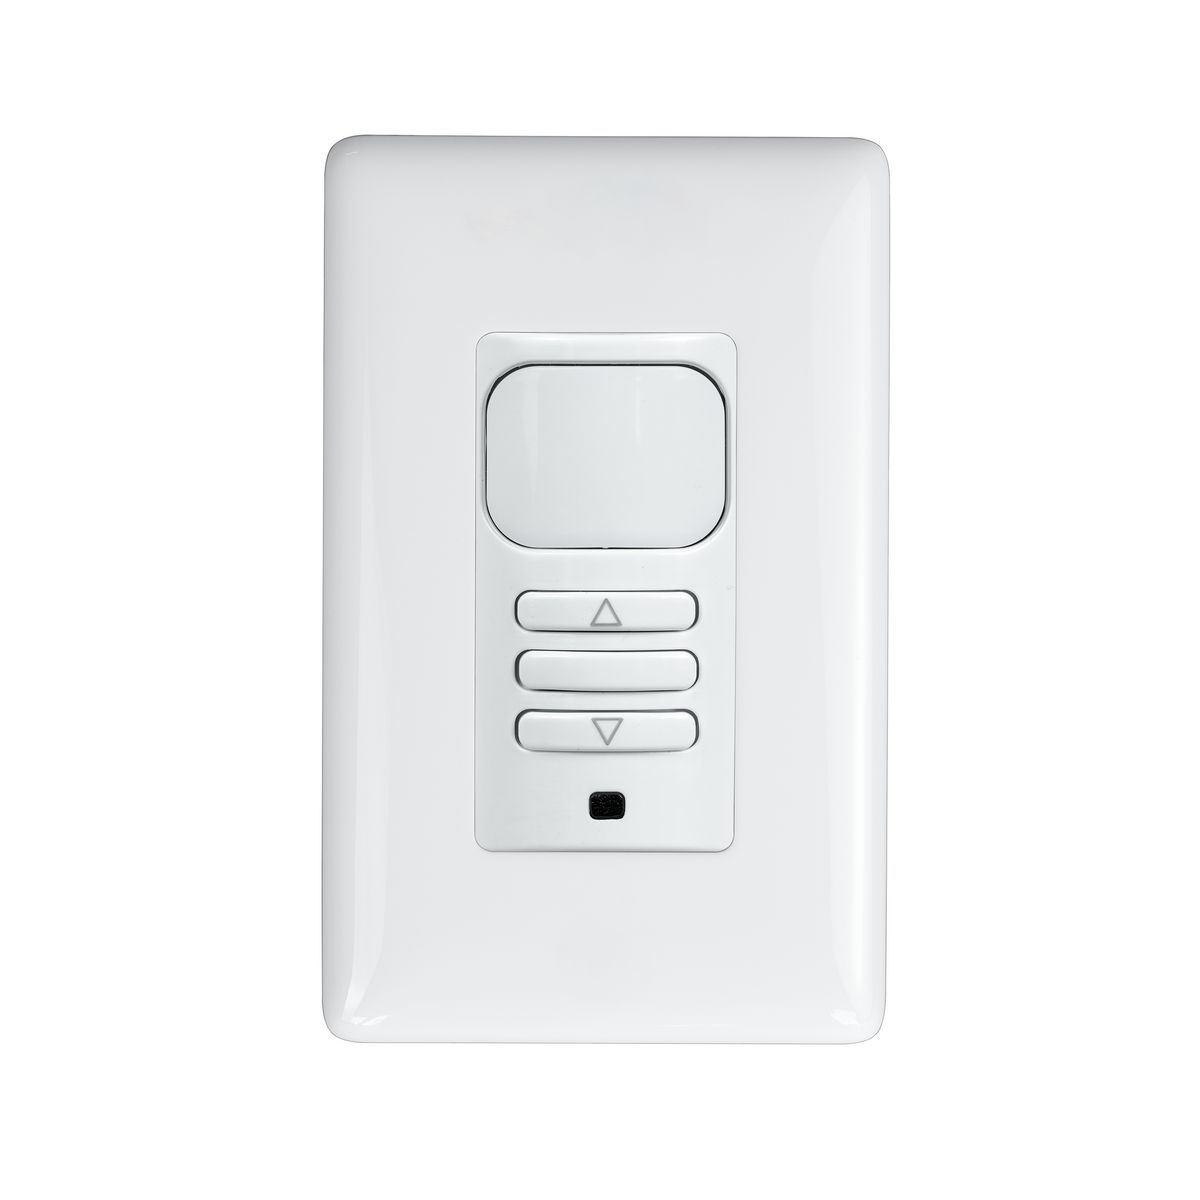 Motion Sensor Light Switch Passive Infrared Wall Occupancy Detector 